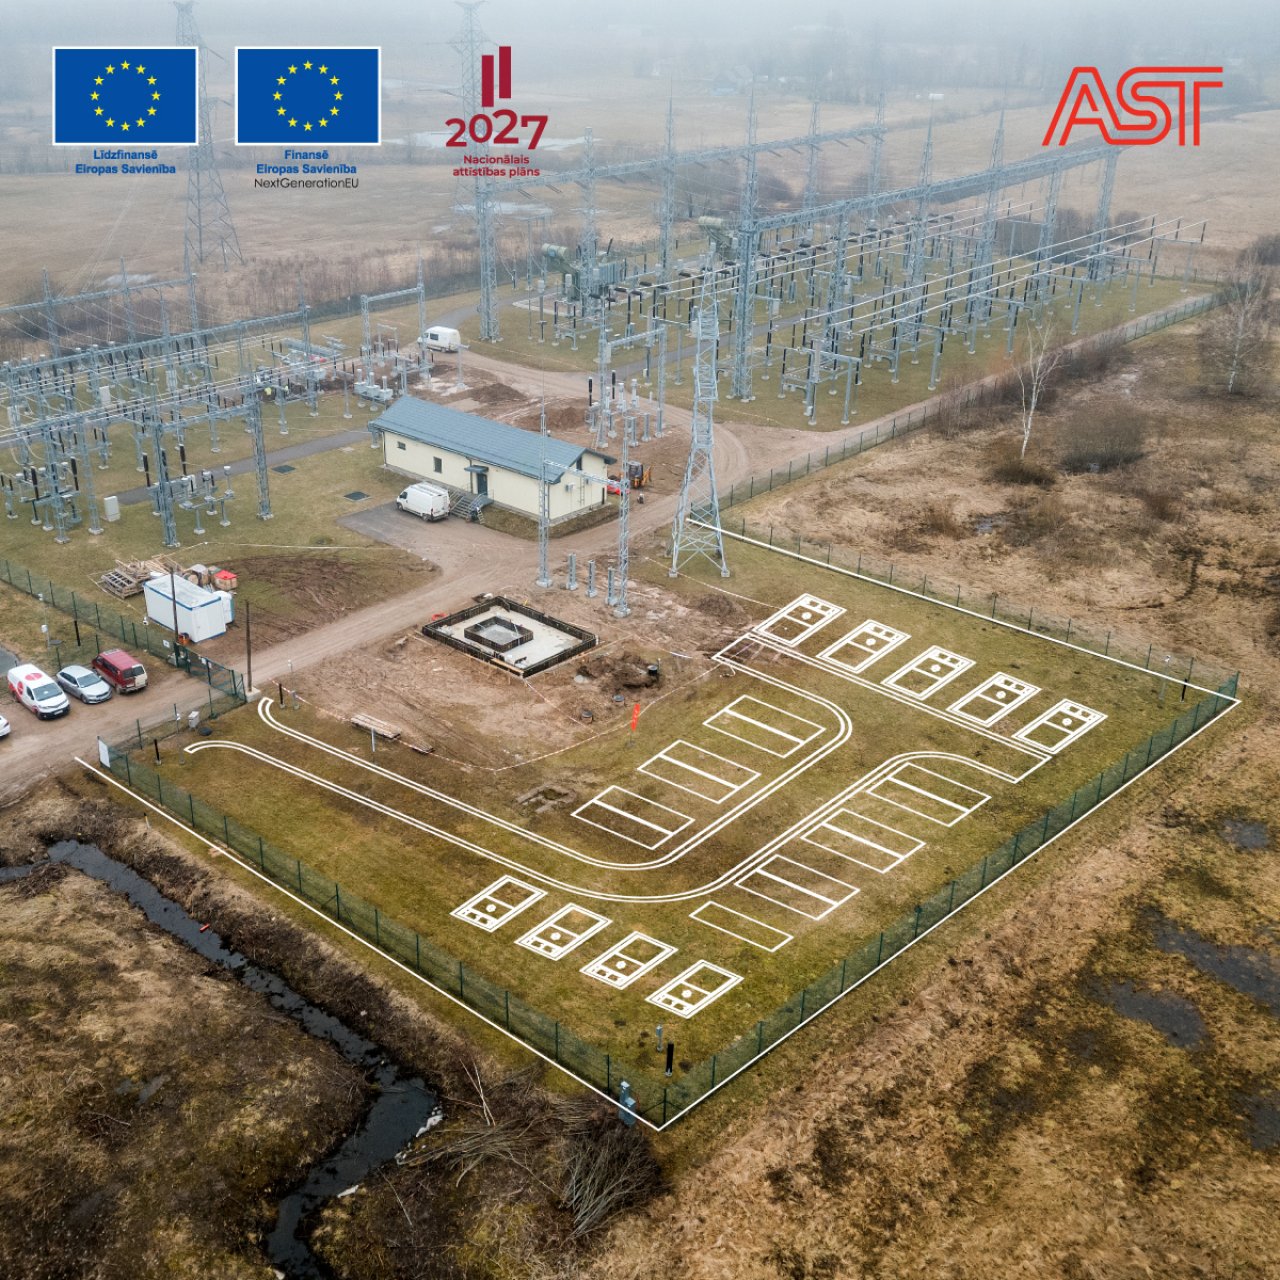 For the security of the energy system in Latvia, the most powerful electricity storage battery systems in Europe will be installed.